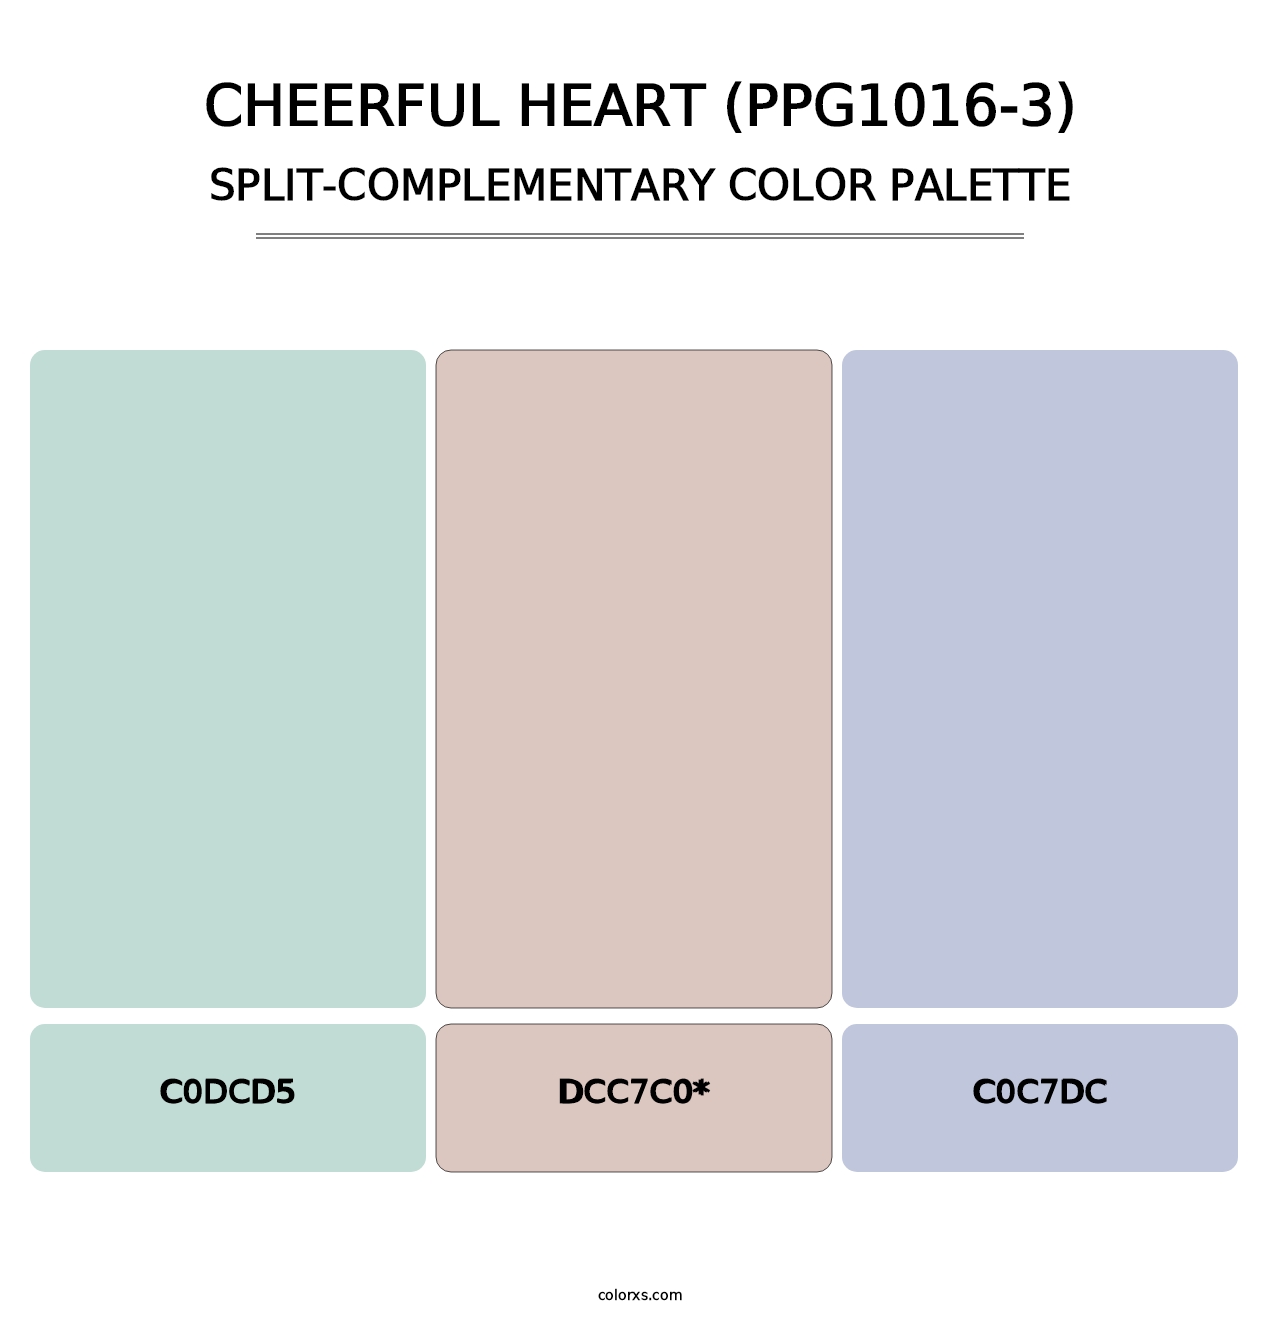 Cheerful Heart (PPG1016-3) - Split-Complementary Color Palette